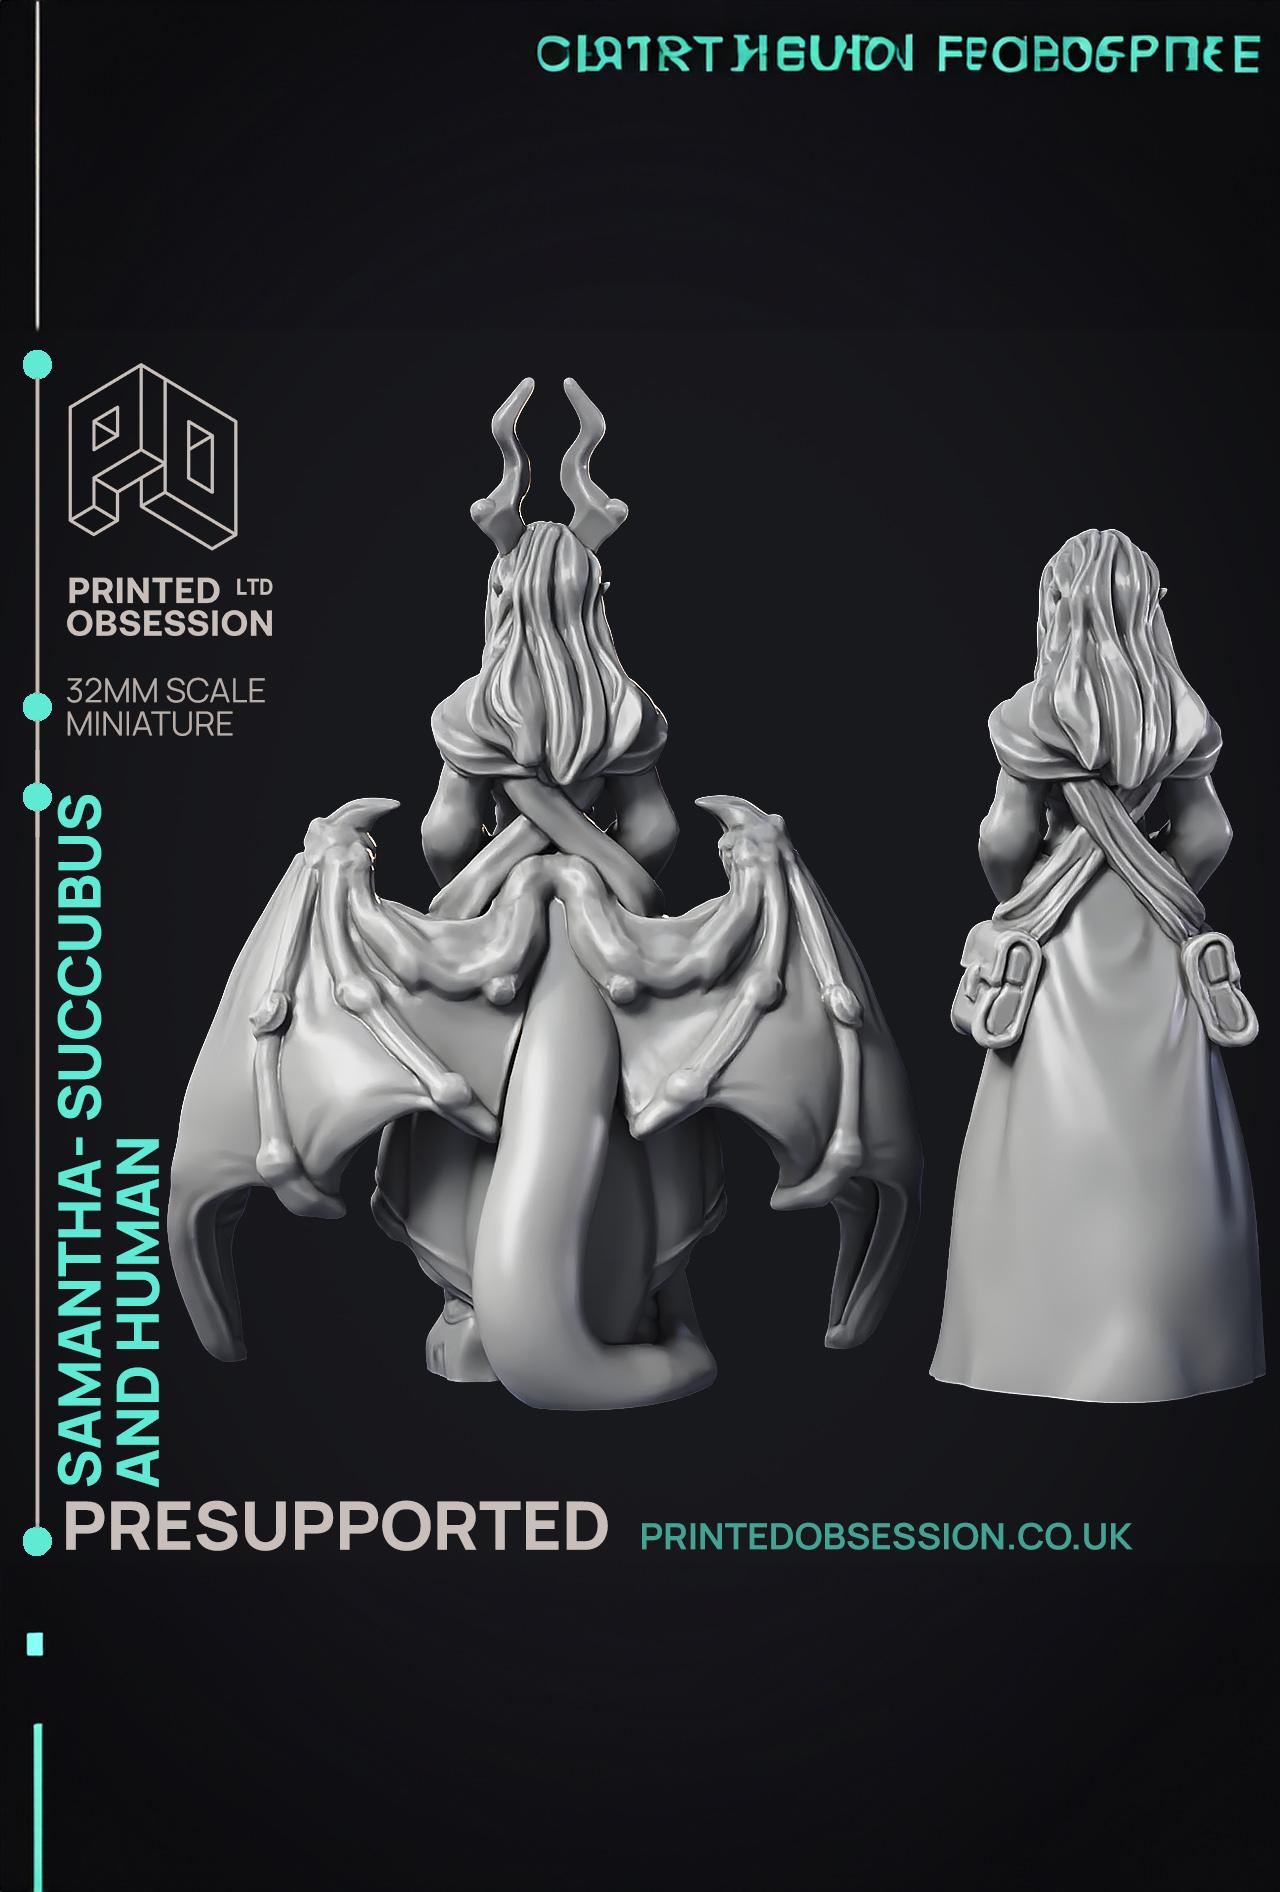 Succubus & Human 'Samantha' - 2 Models - PRESUPPORTED - Hell Hath No Fury - 32mm scale  3d model